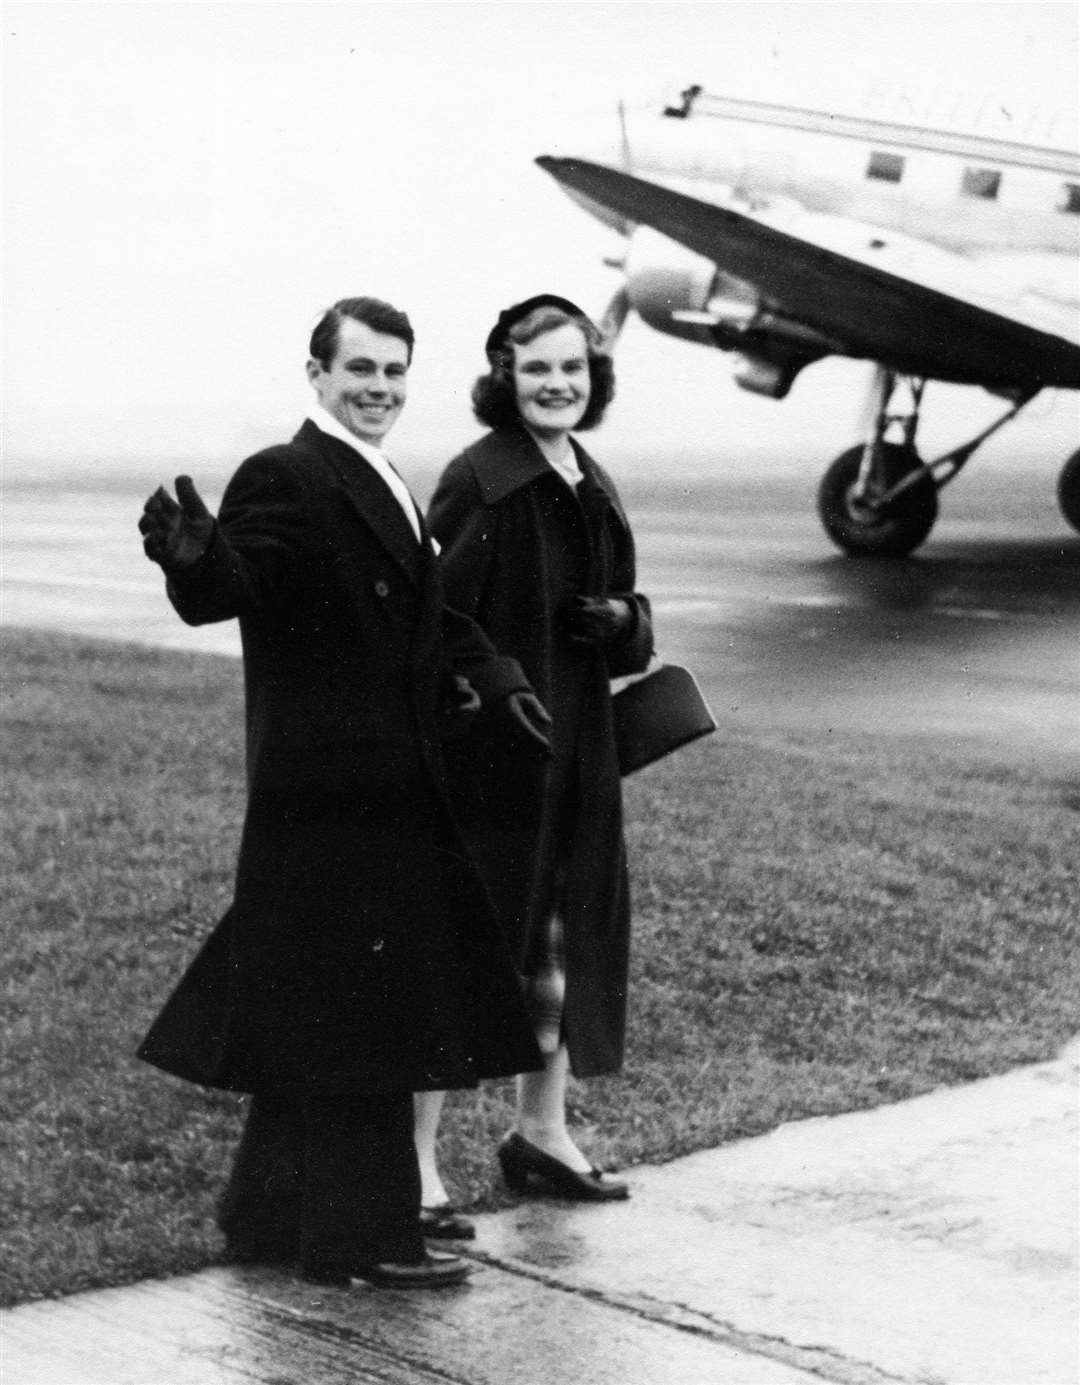 Morris Pottinger as a young man with his first wife, Janet (Nettie) Dunnet.